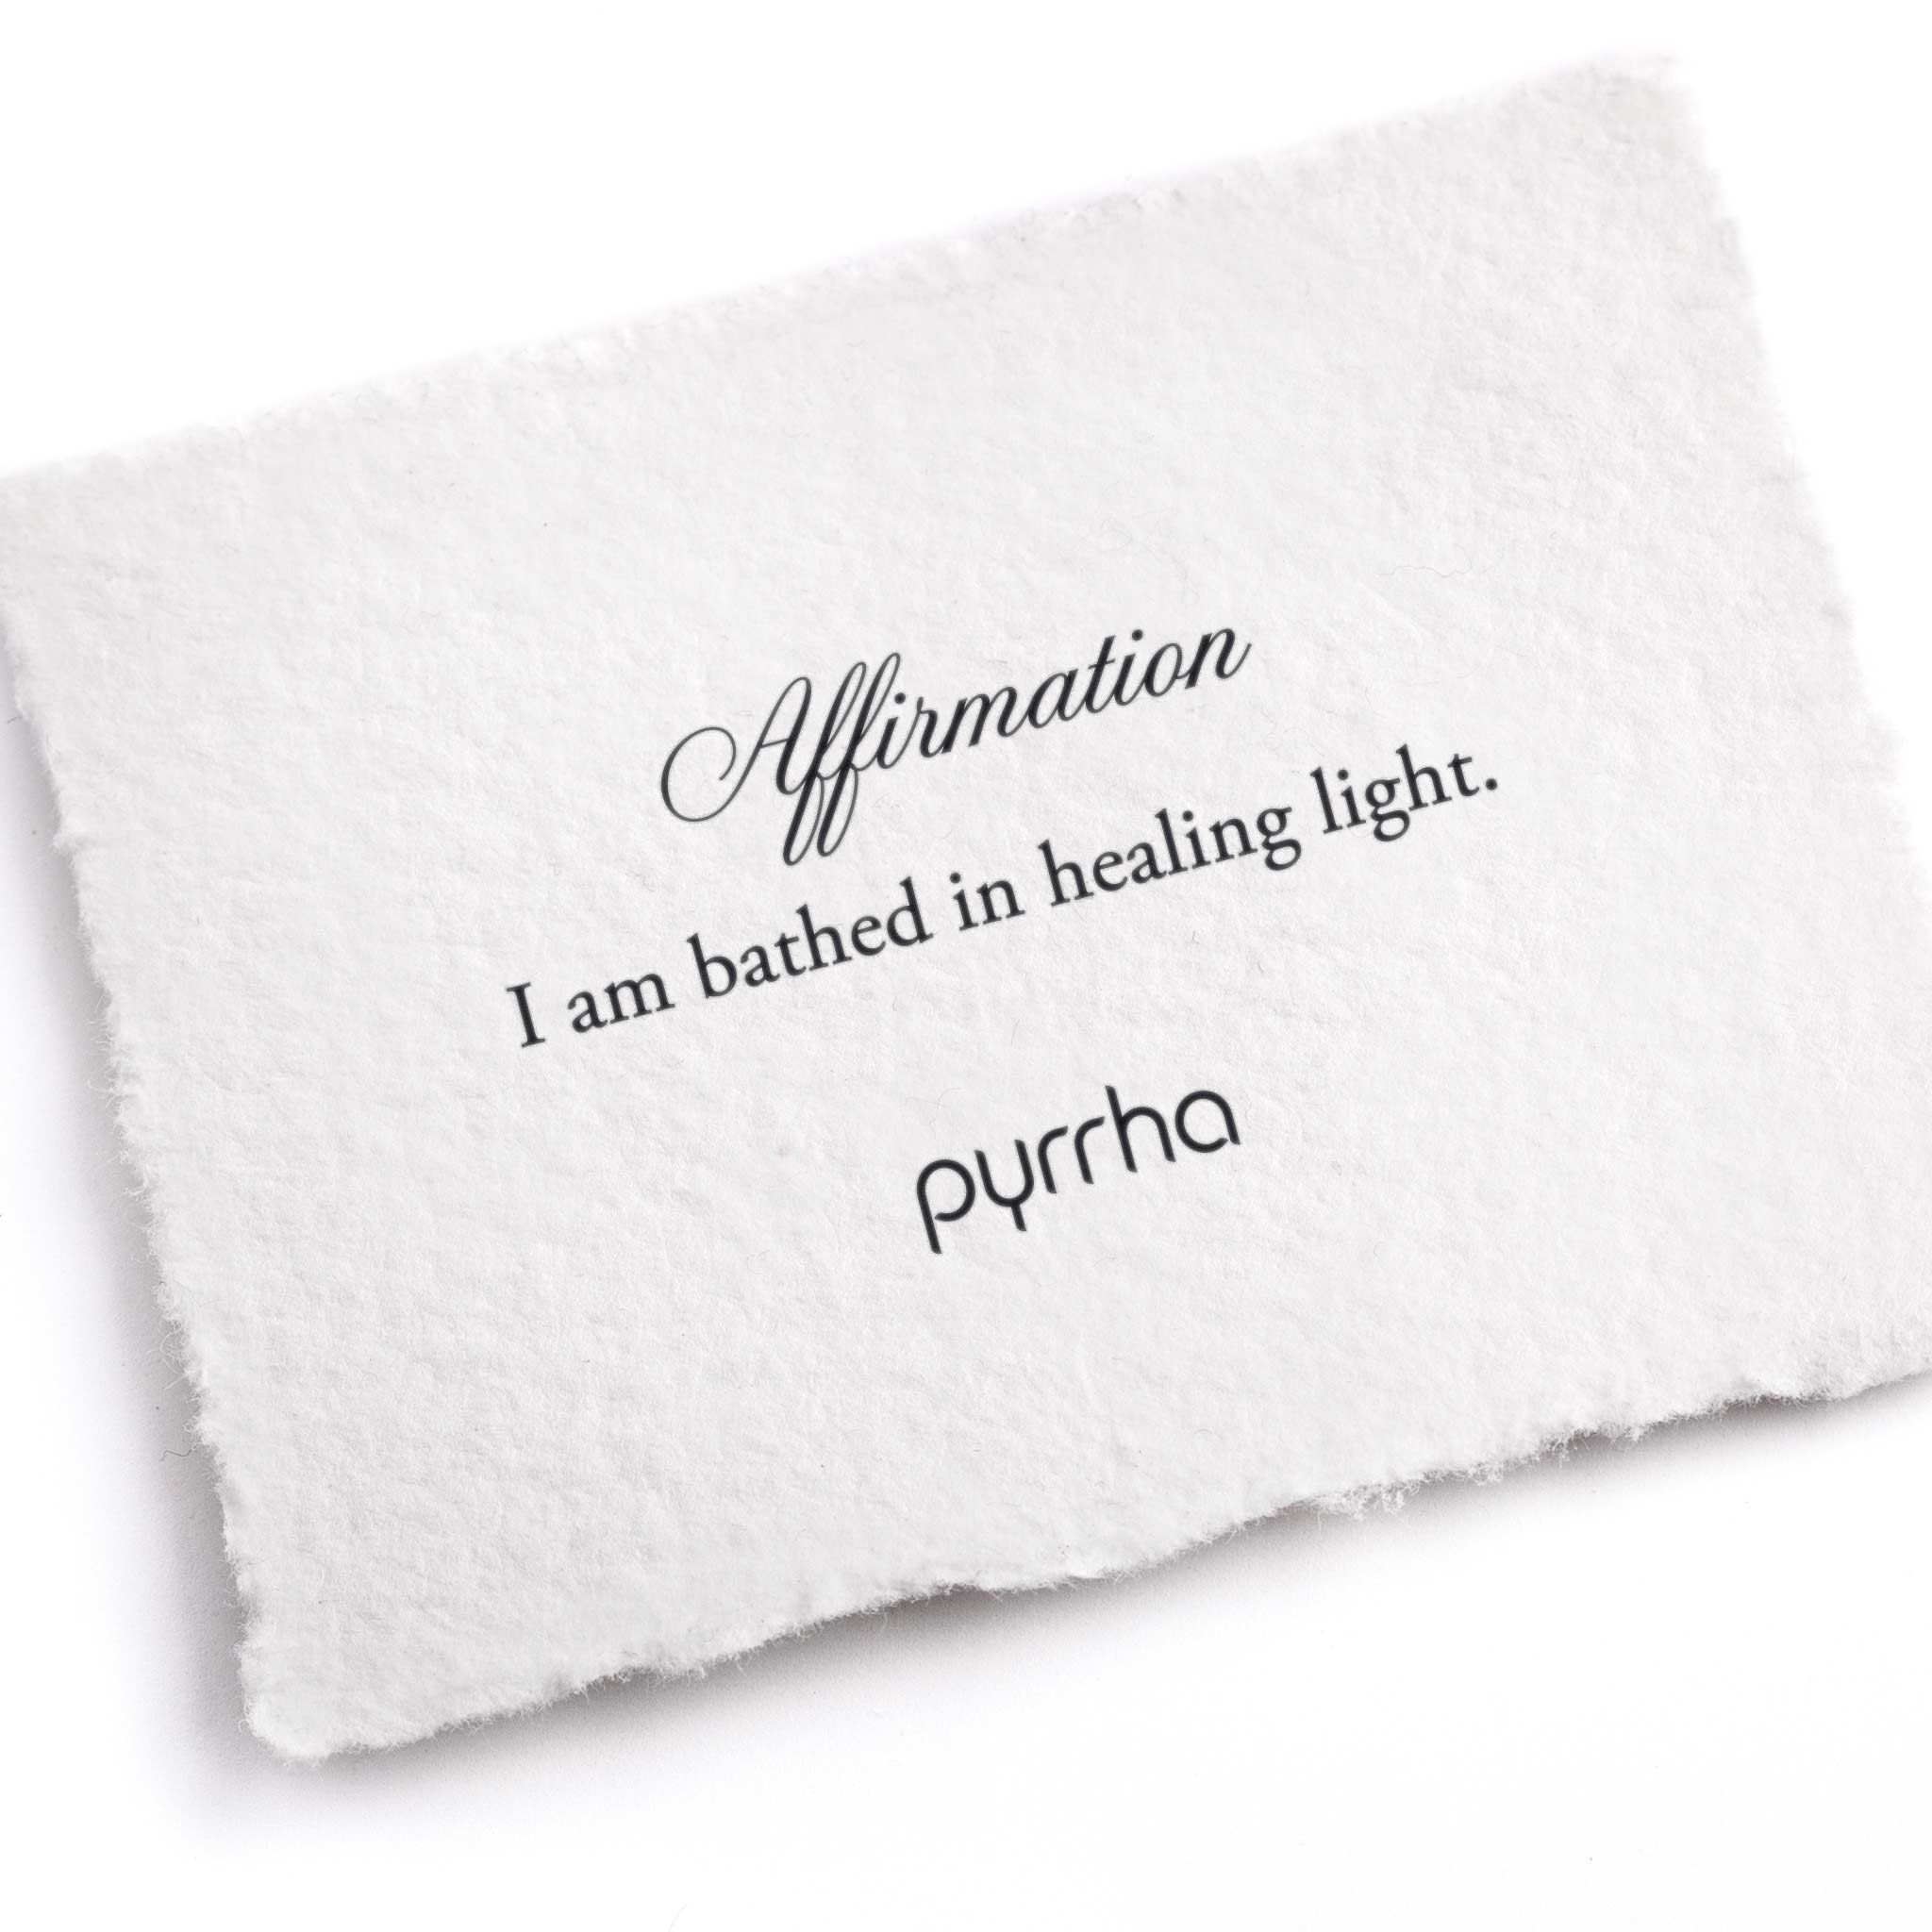 A hand-torn, letterpress printed card describing the meaning for Pyrrha's I Am Bathed In Healing Light Affirmation Talisman Necklace